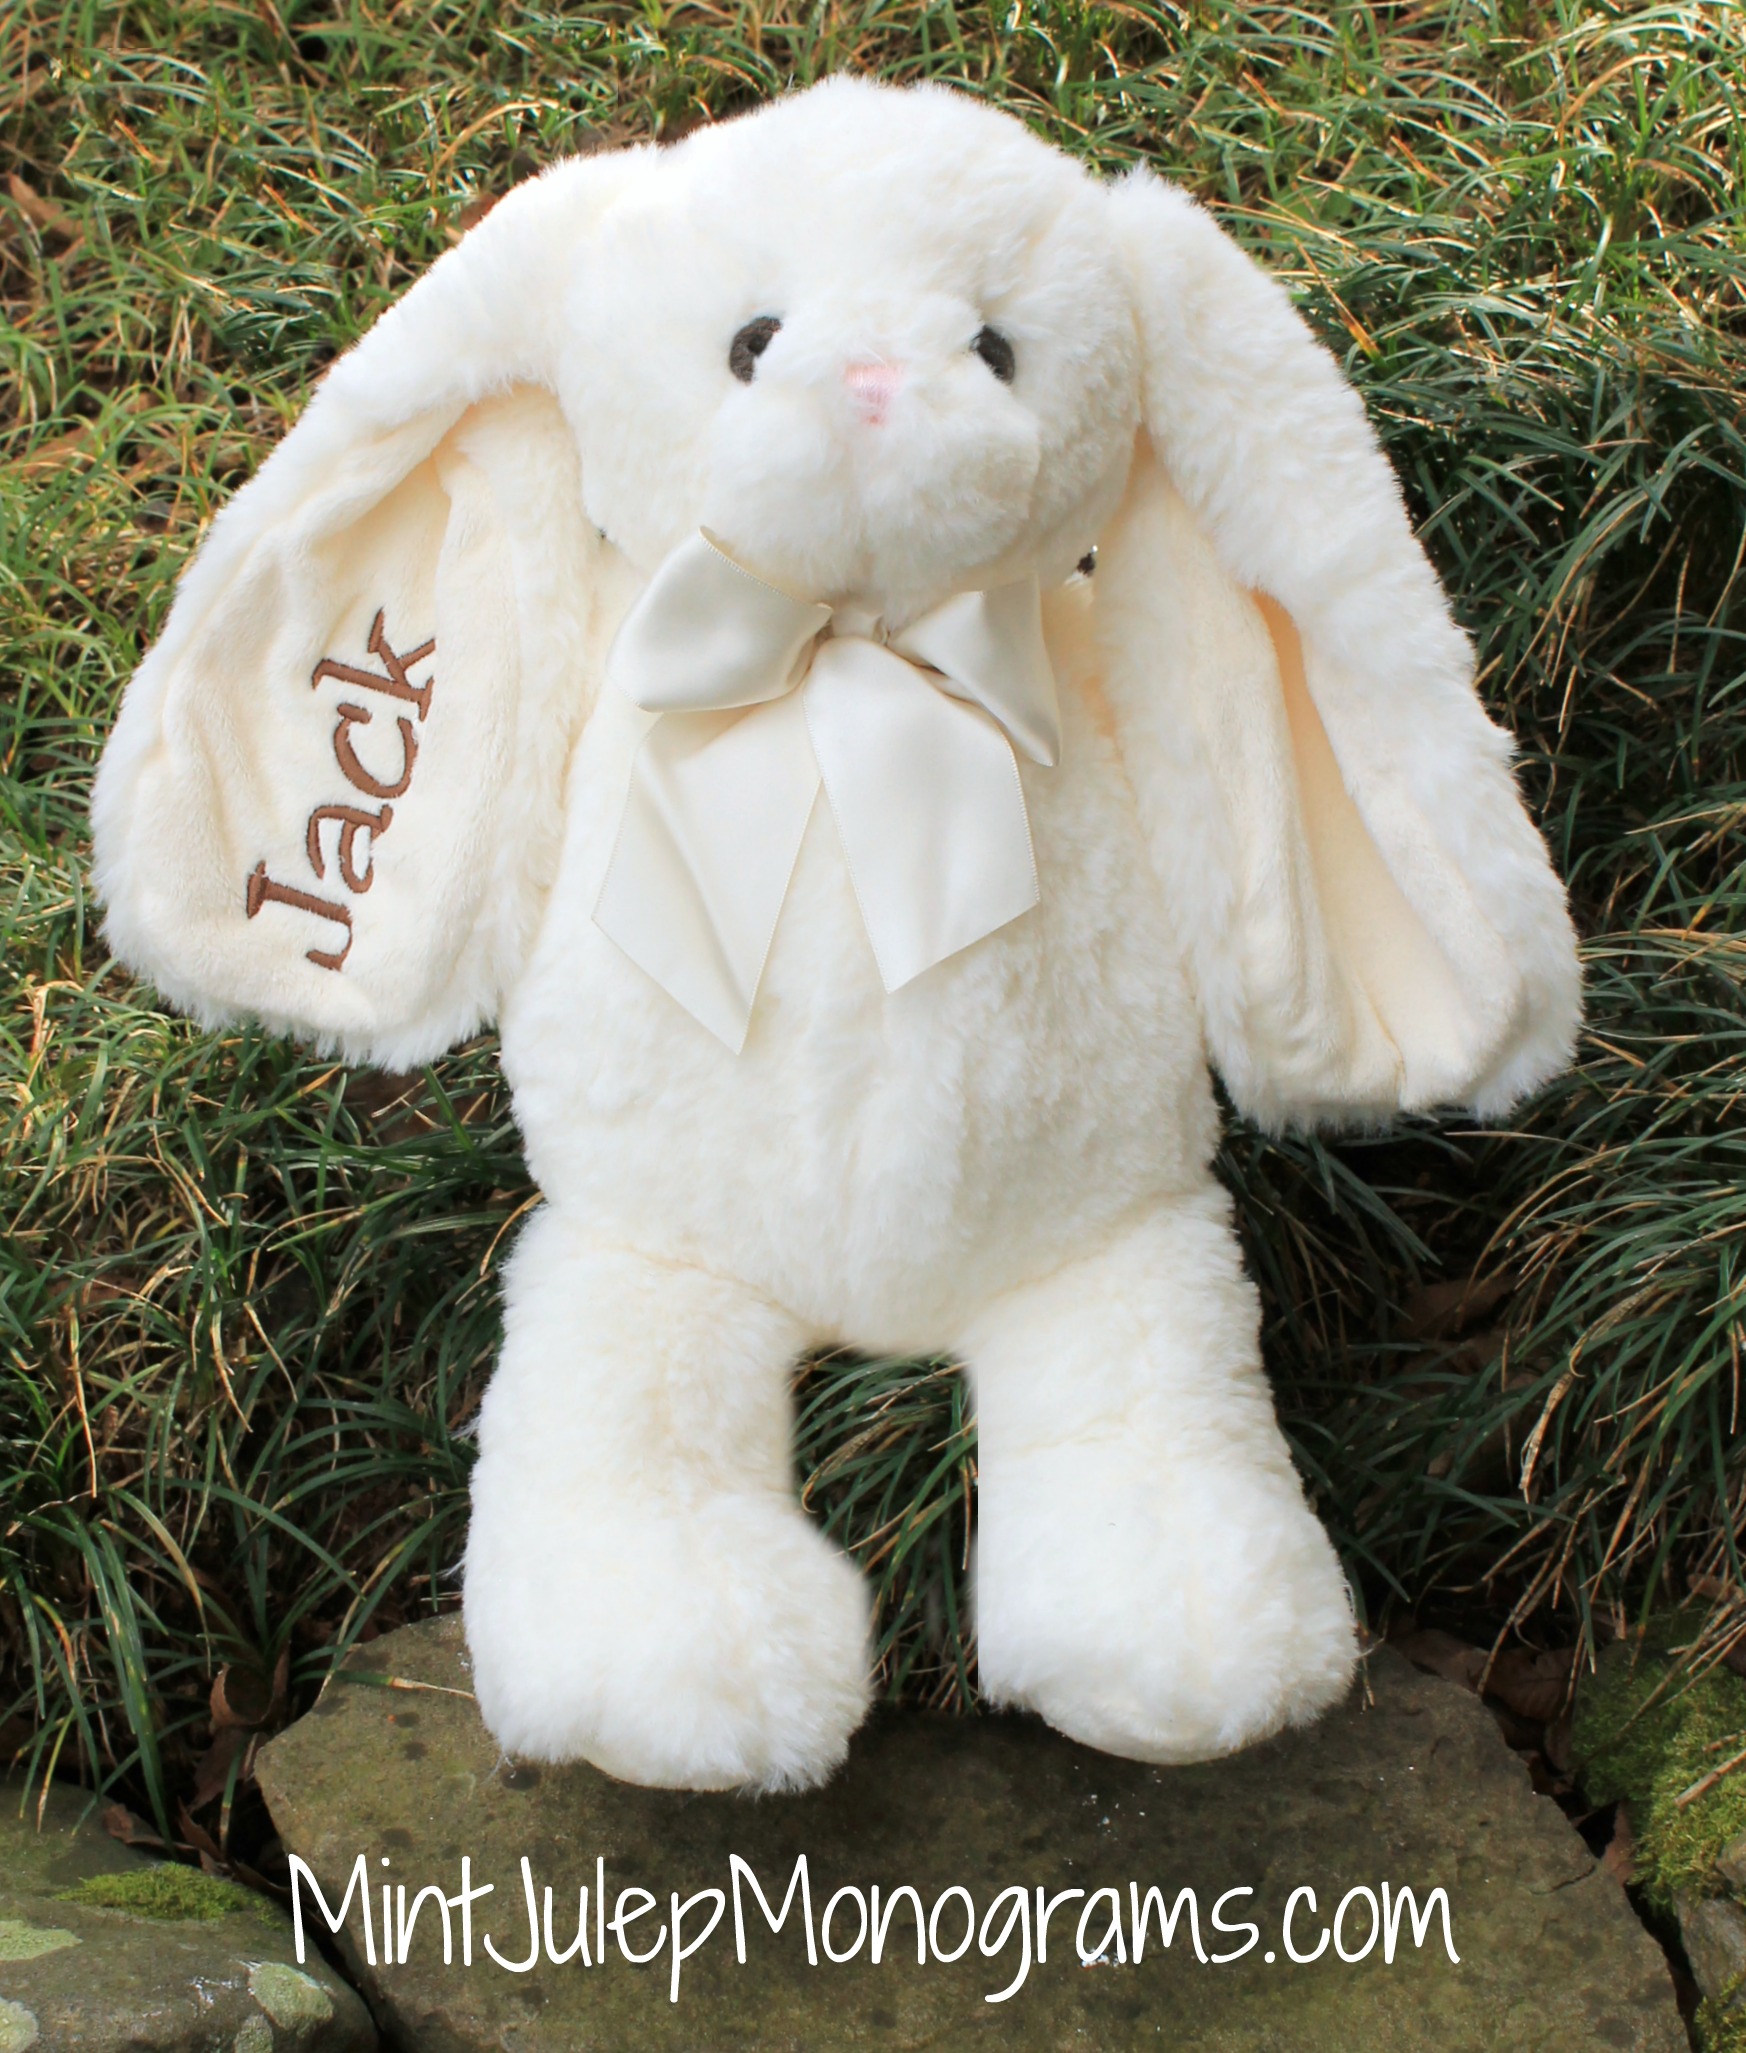 Bunny- Monogrammed Ear for your Favorite Little Ones!